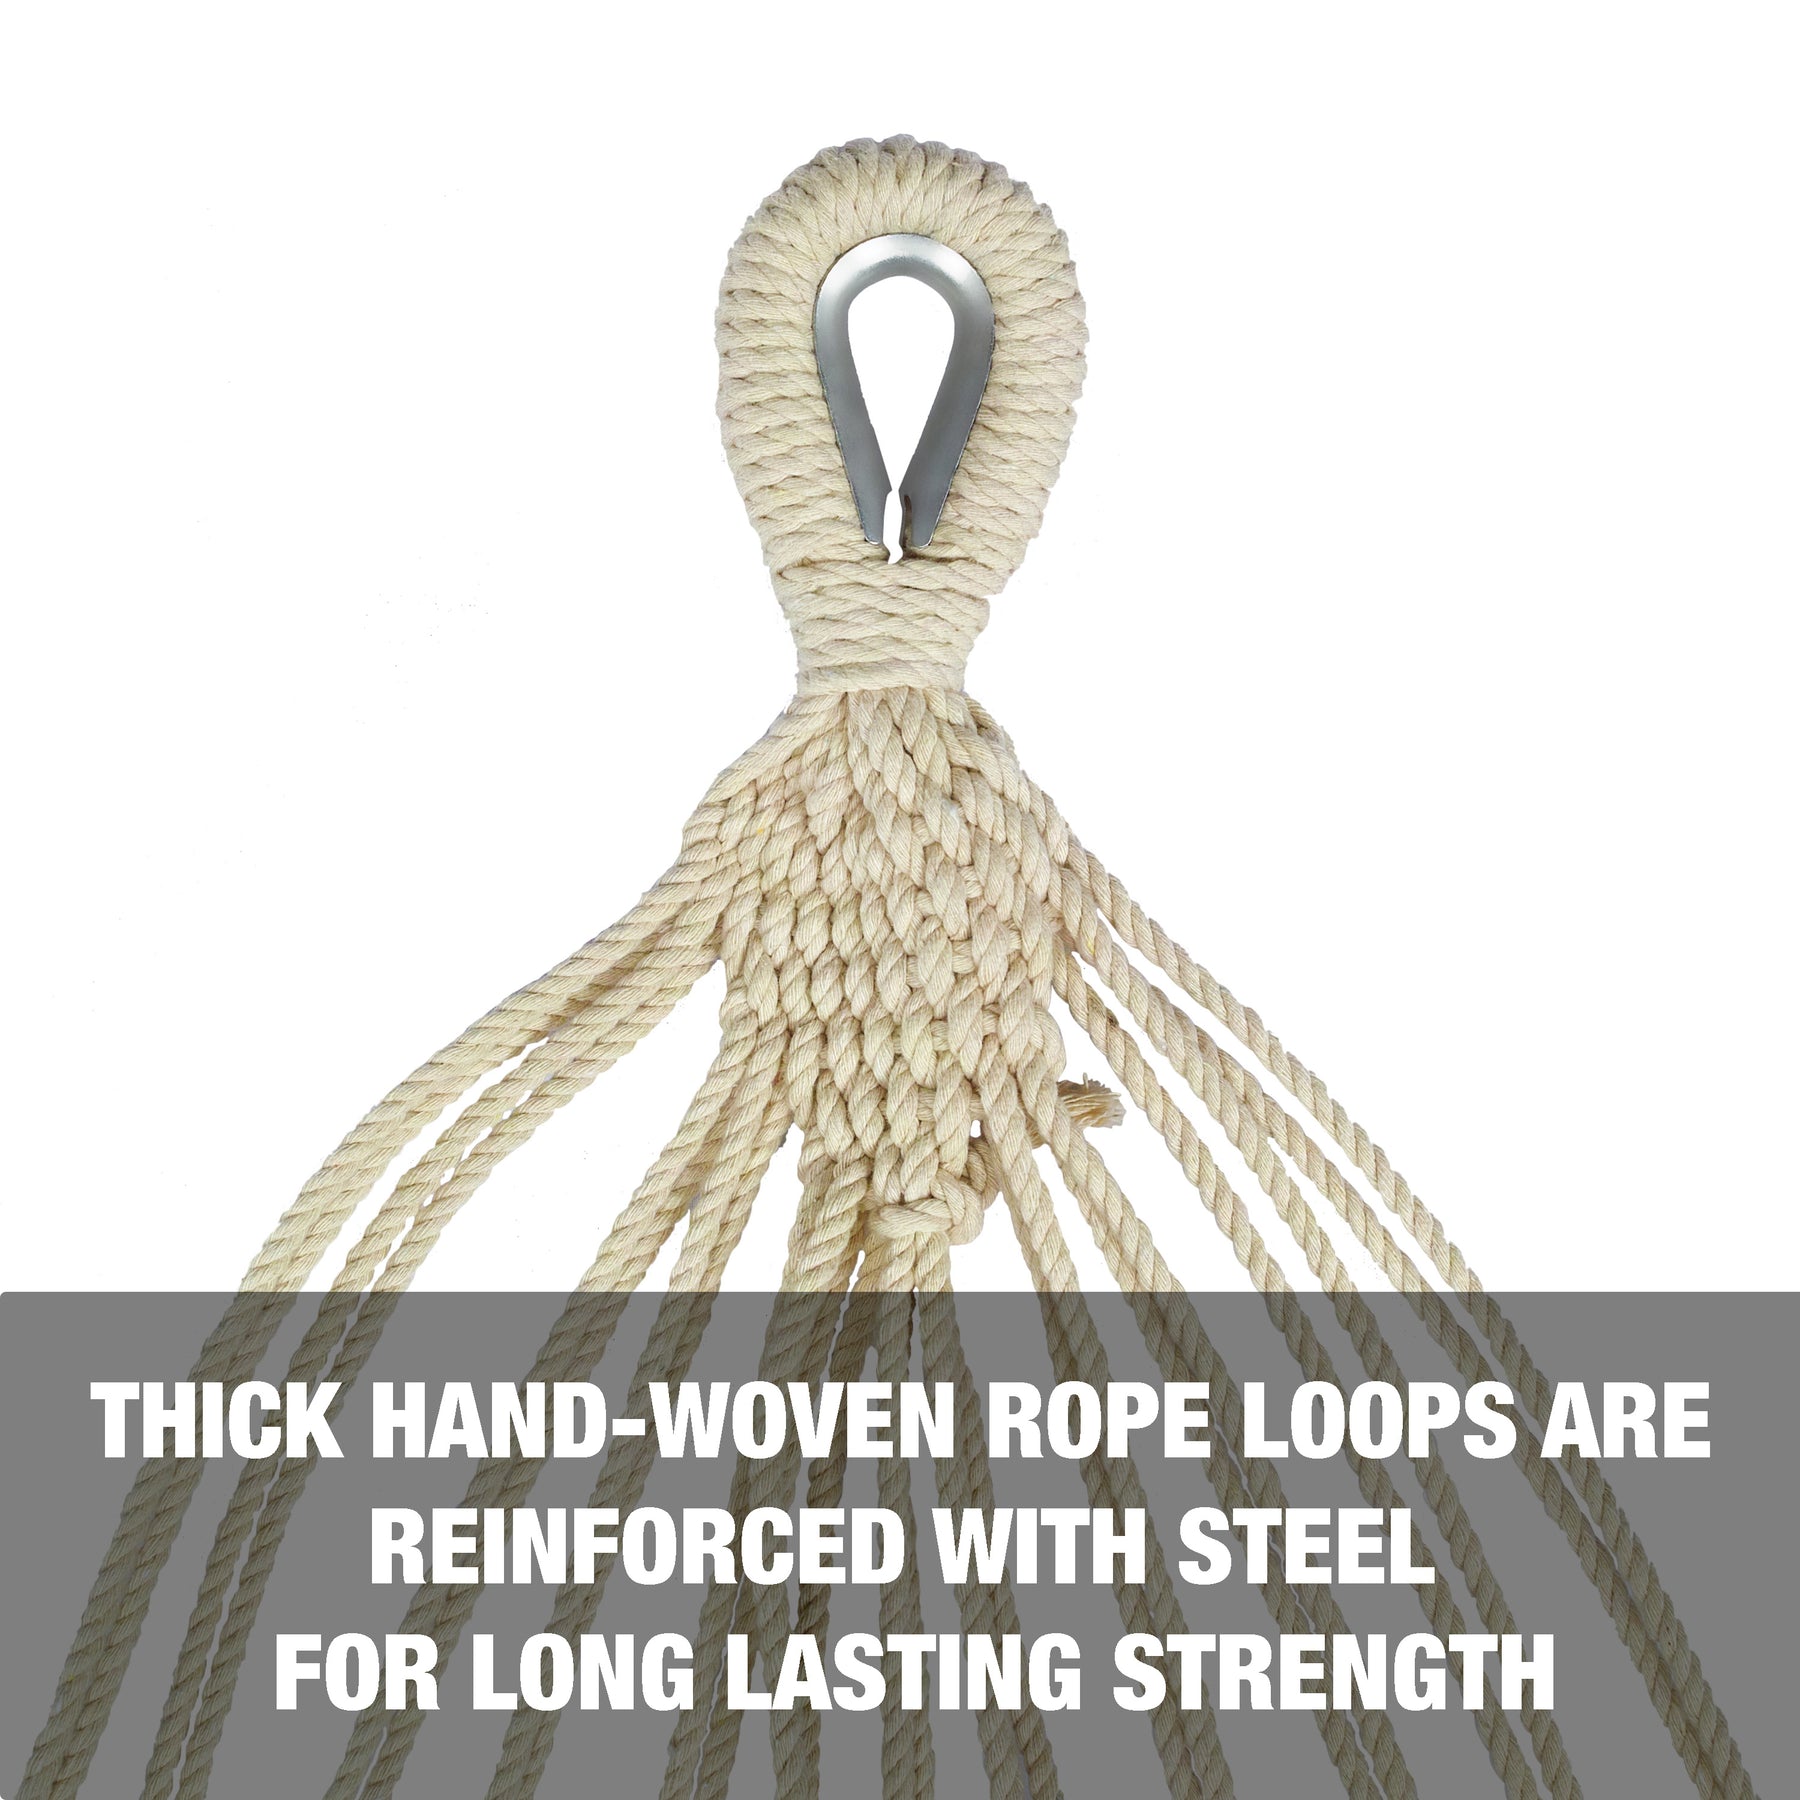 Thick hand-woven rope loops are reinforced with steel for long-lasting strength.